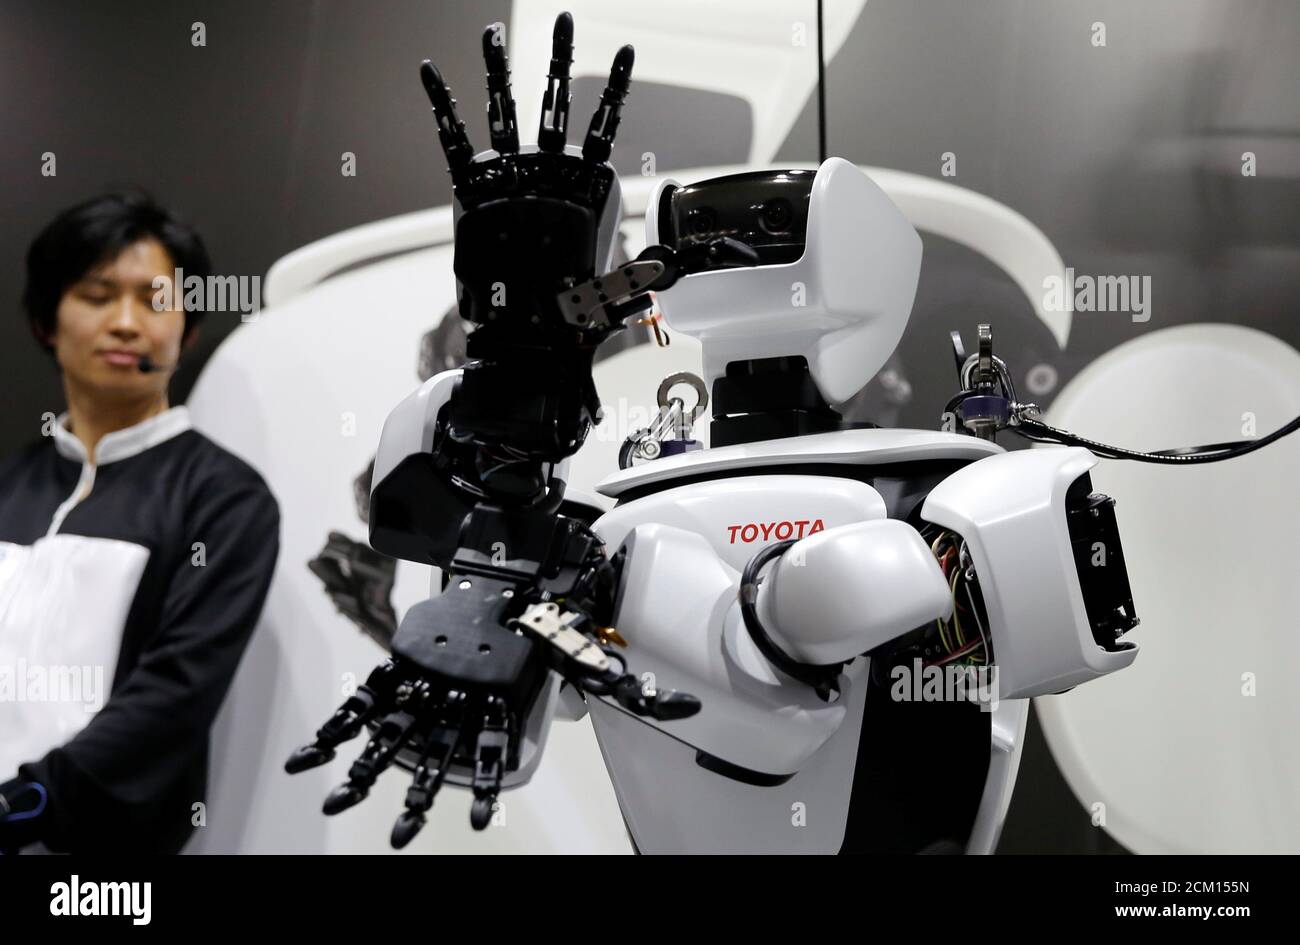 Toyota Motor Corp's third generation humanoid robot, T-HR3 is seen during  its demonstration at the International Robot Exhibition 2017 in Tokyo,  Japan, November 29, 2017. REUTERS/Toru Hanai Stock Photo - Alamy